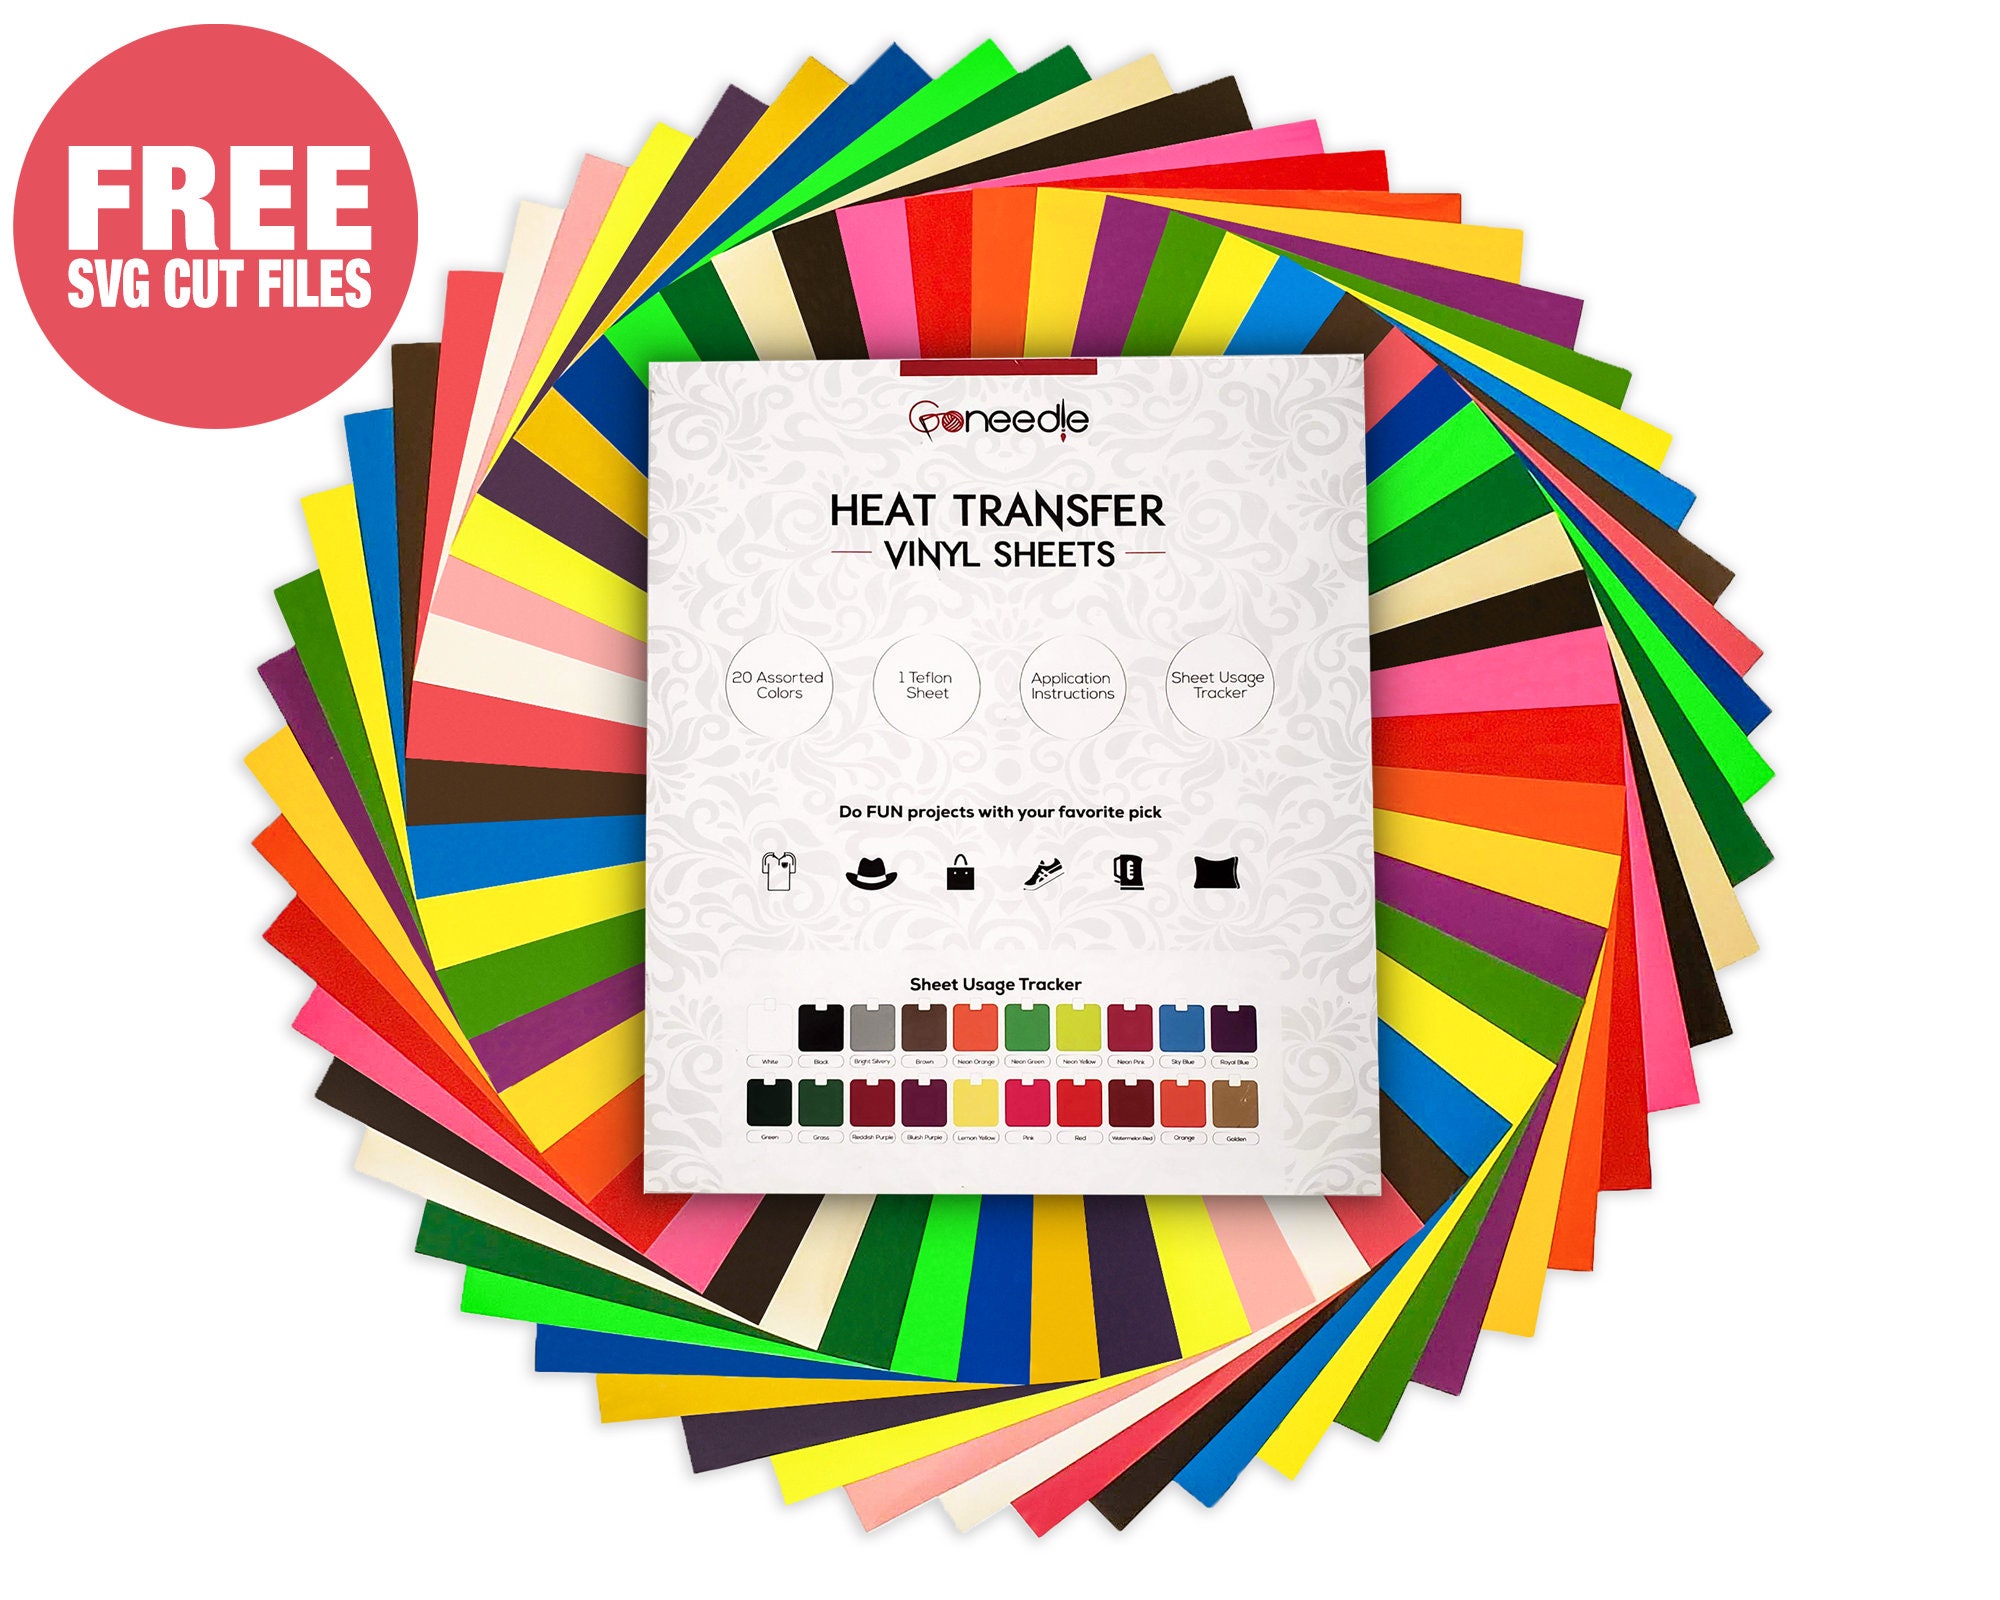 Glitter HTV Heat Transfer Vinyl 12pcs Iron on Vinyl 12in x 10in, 10 Assorted Colors Weed Heat Press Vinyl and 1 Teflon Sheet for T-shirts Works